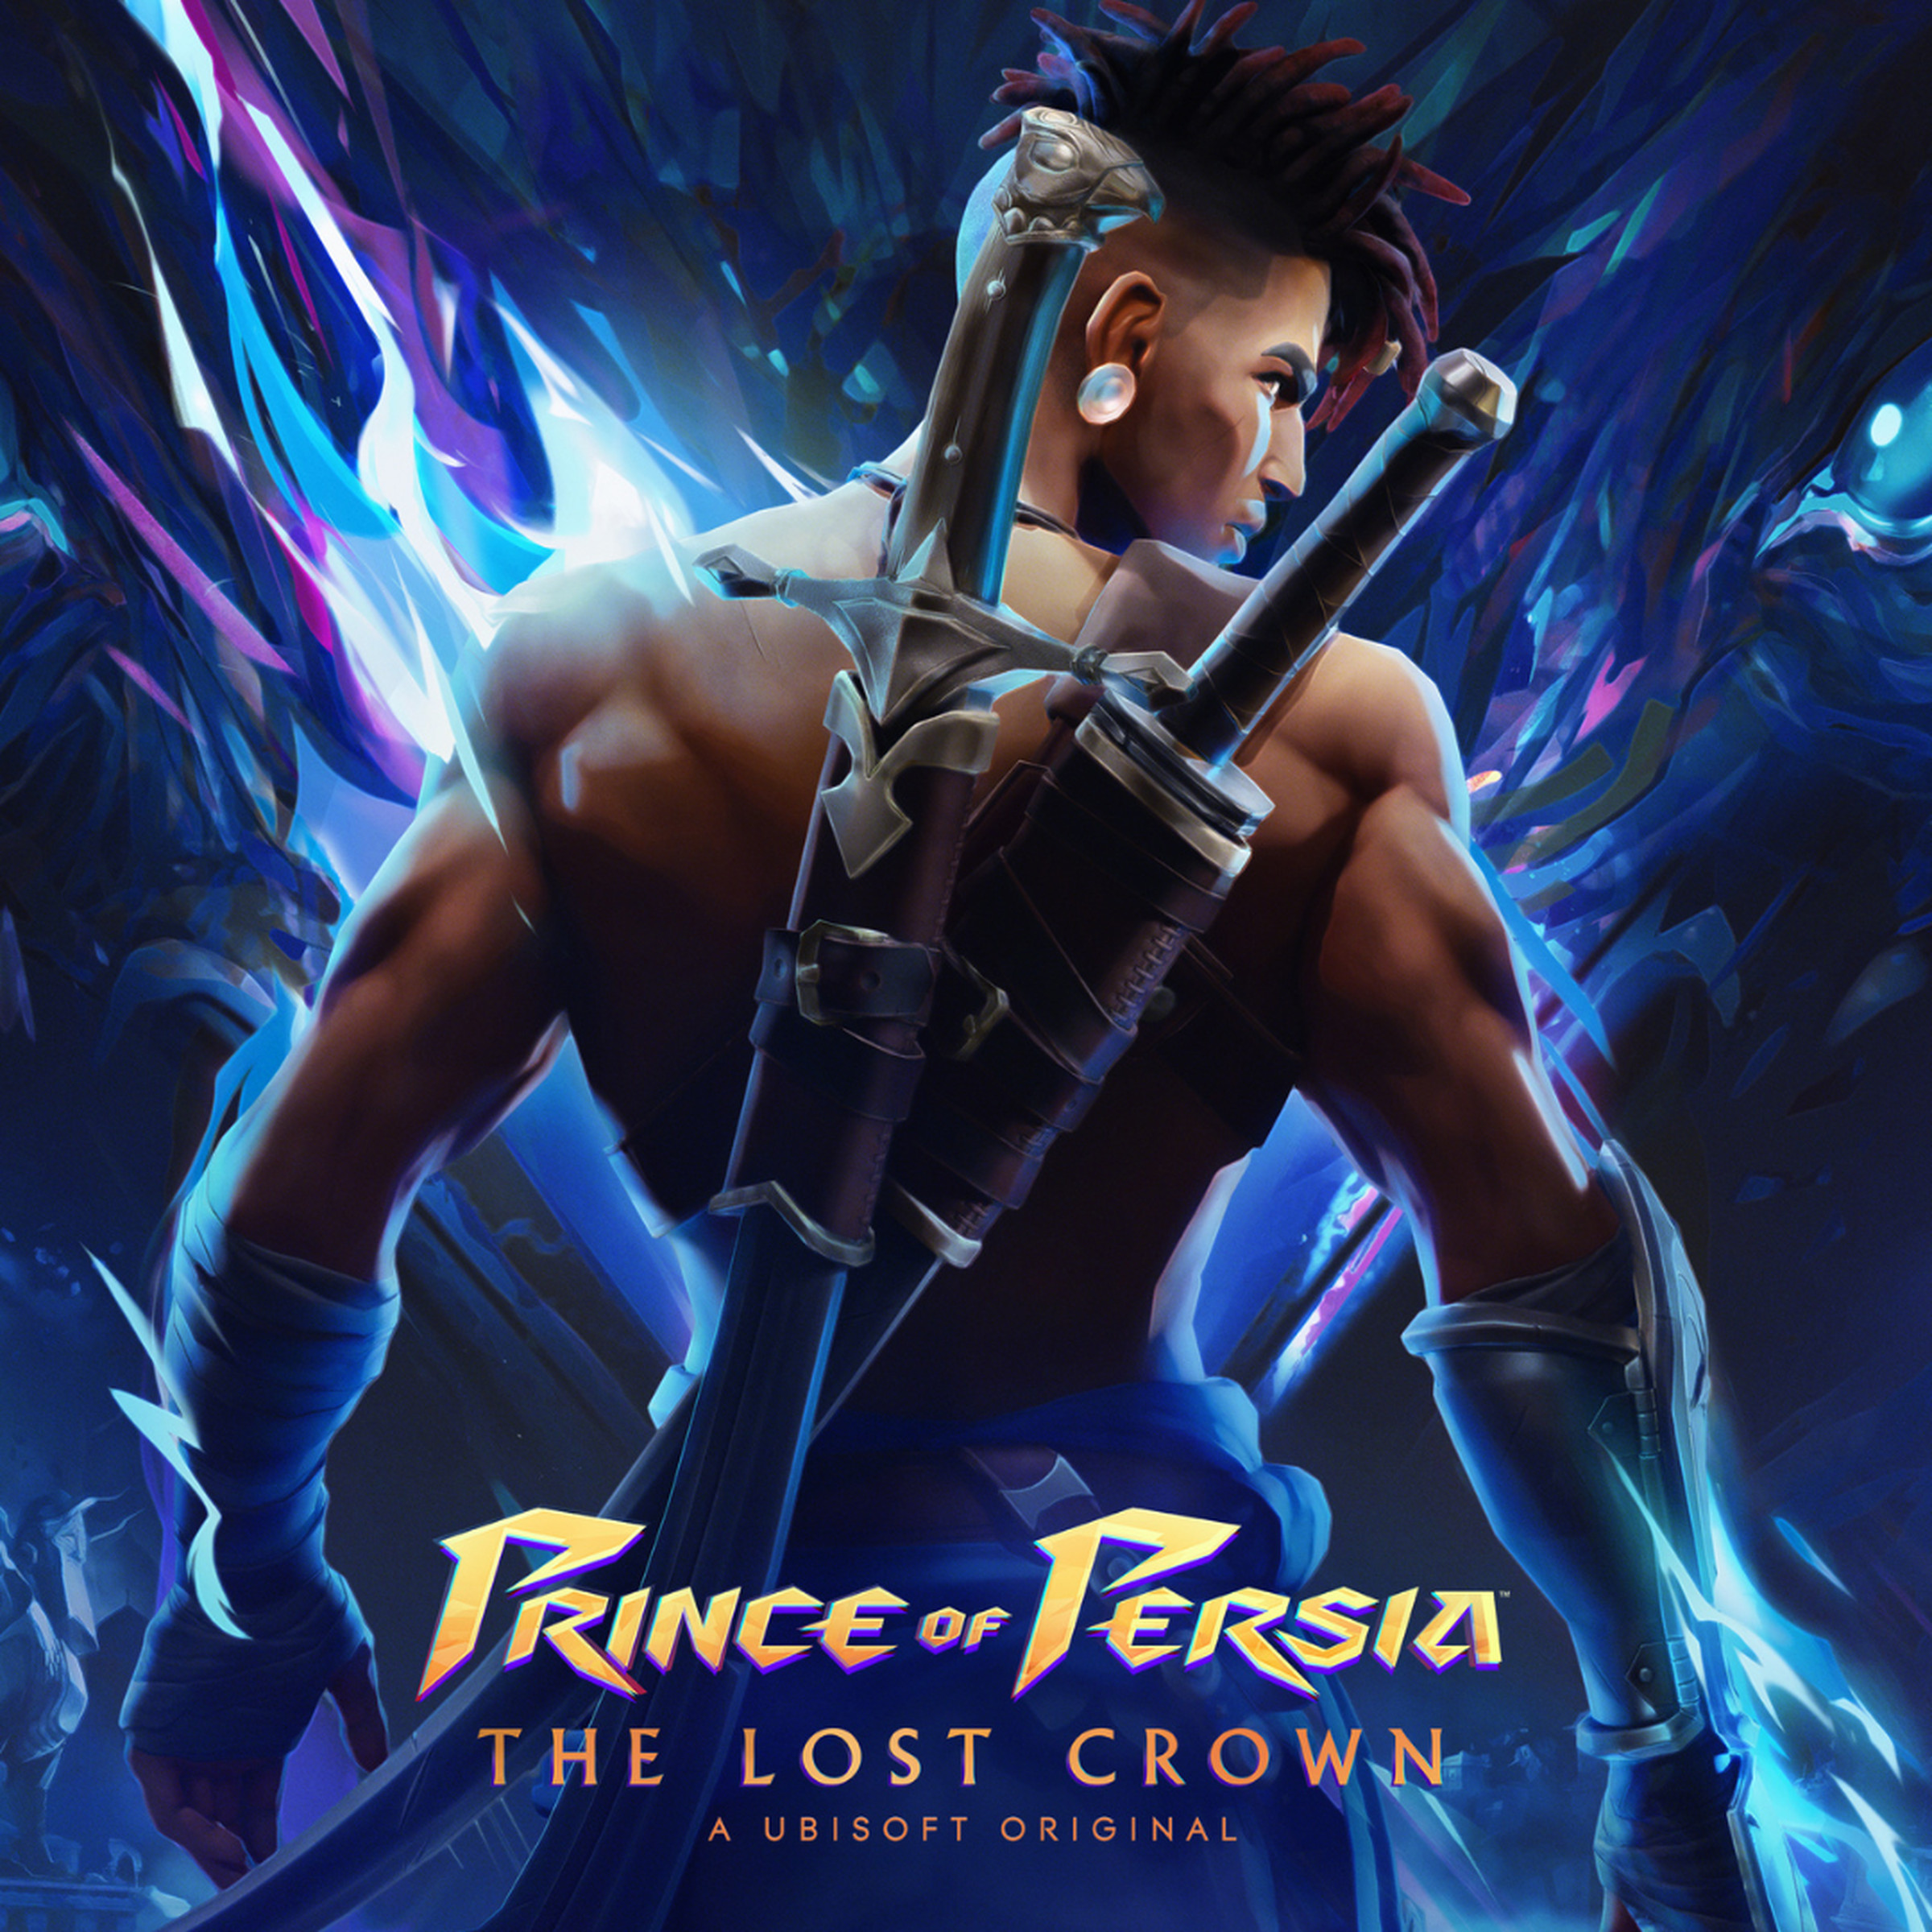 Key art from Prince of Persia: The Lost Crown featuring main character Sargon looking over his shoulder at the viewer.